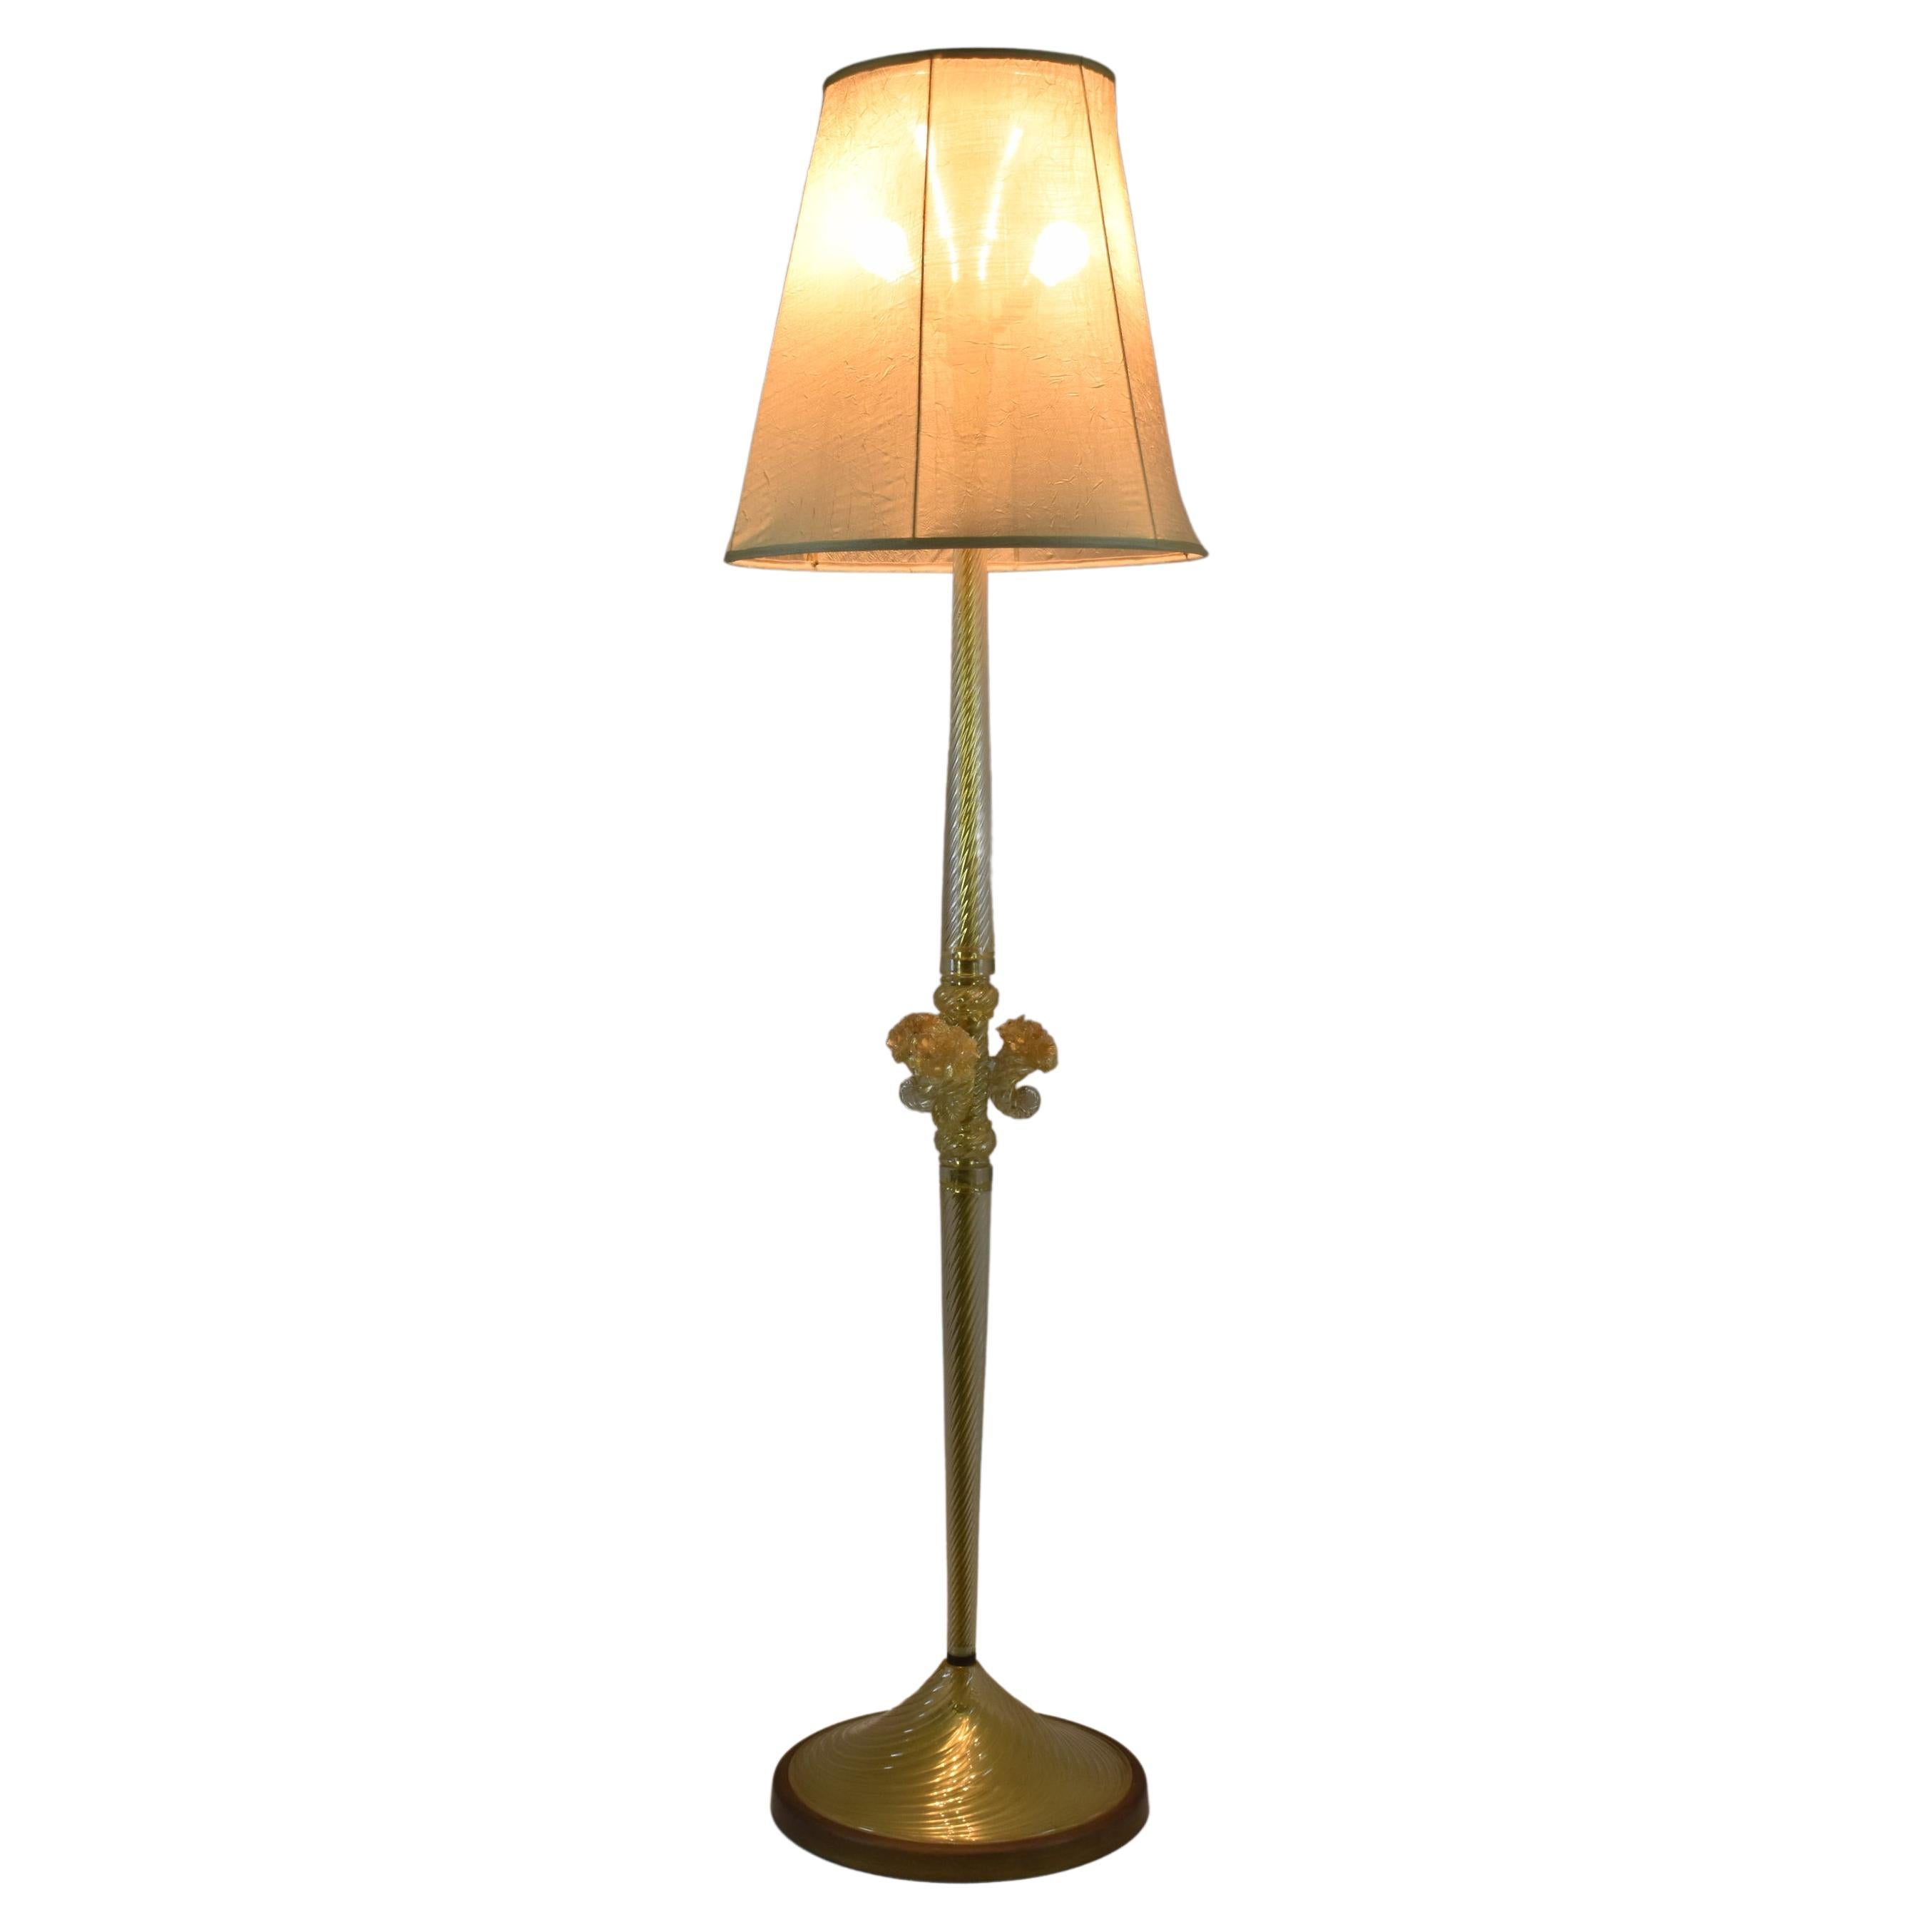 Italian Gold Murano Floor Lamp by Barovier Ercole, 1950s For Sale